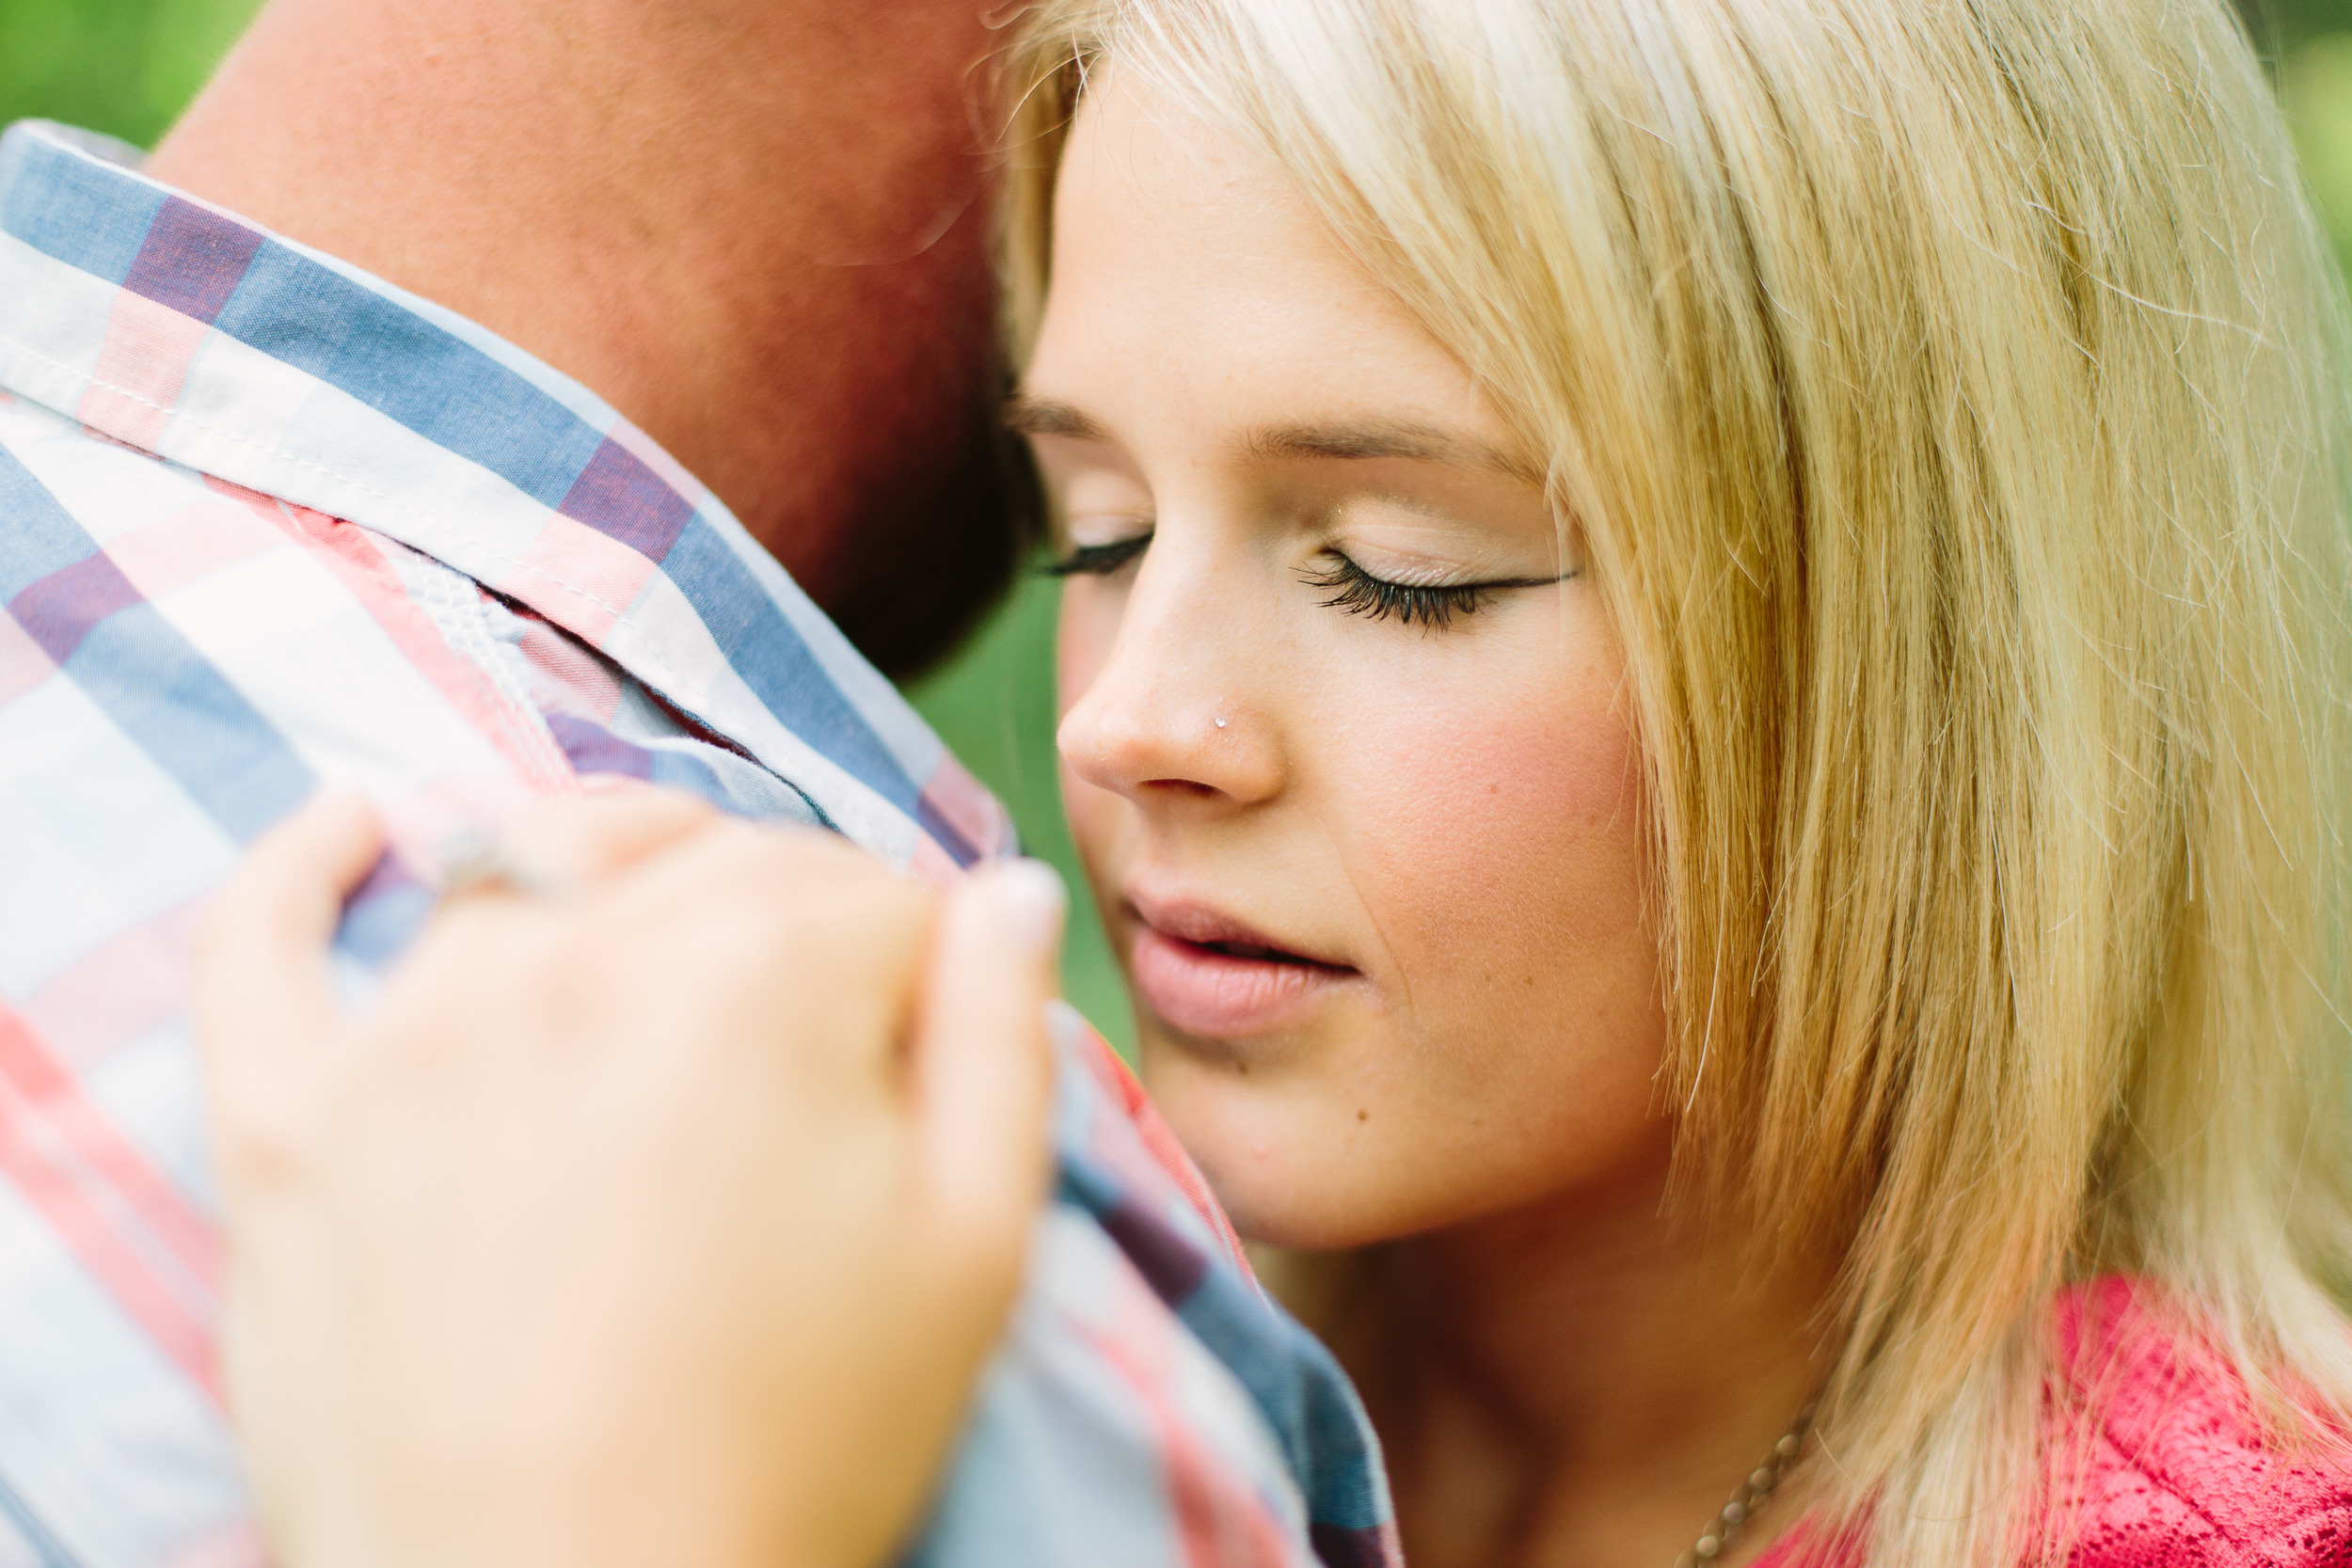 Grand View Lodge Brainerd Summer Engagement Session